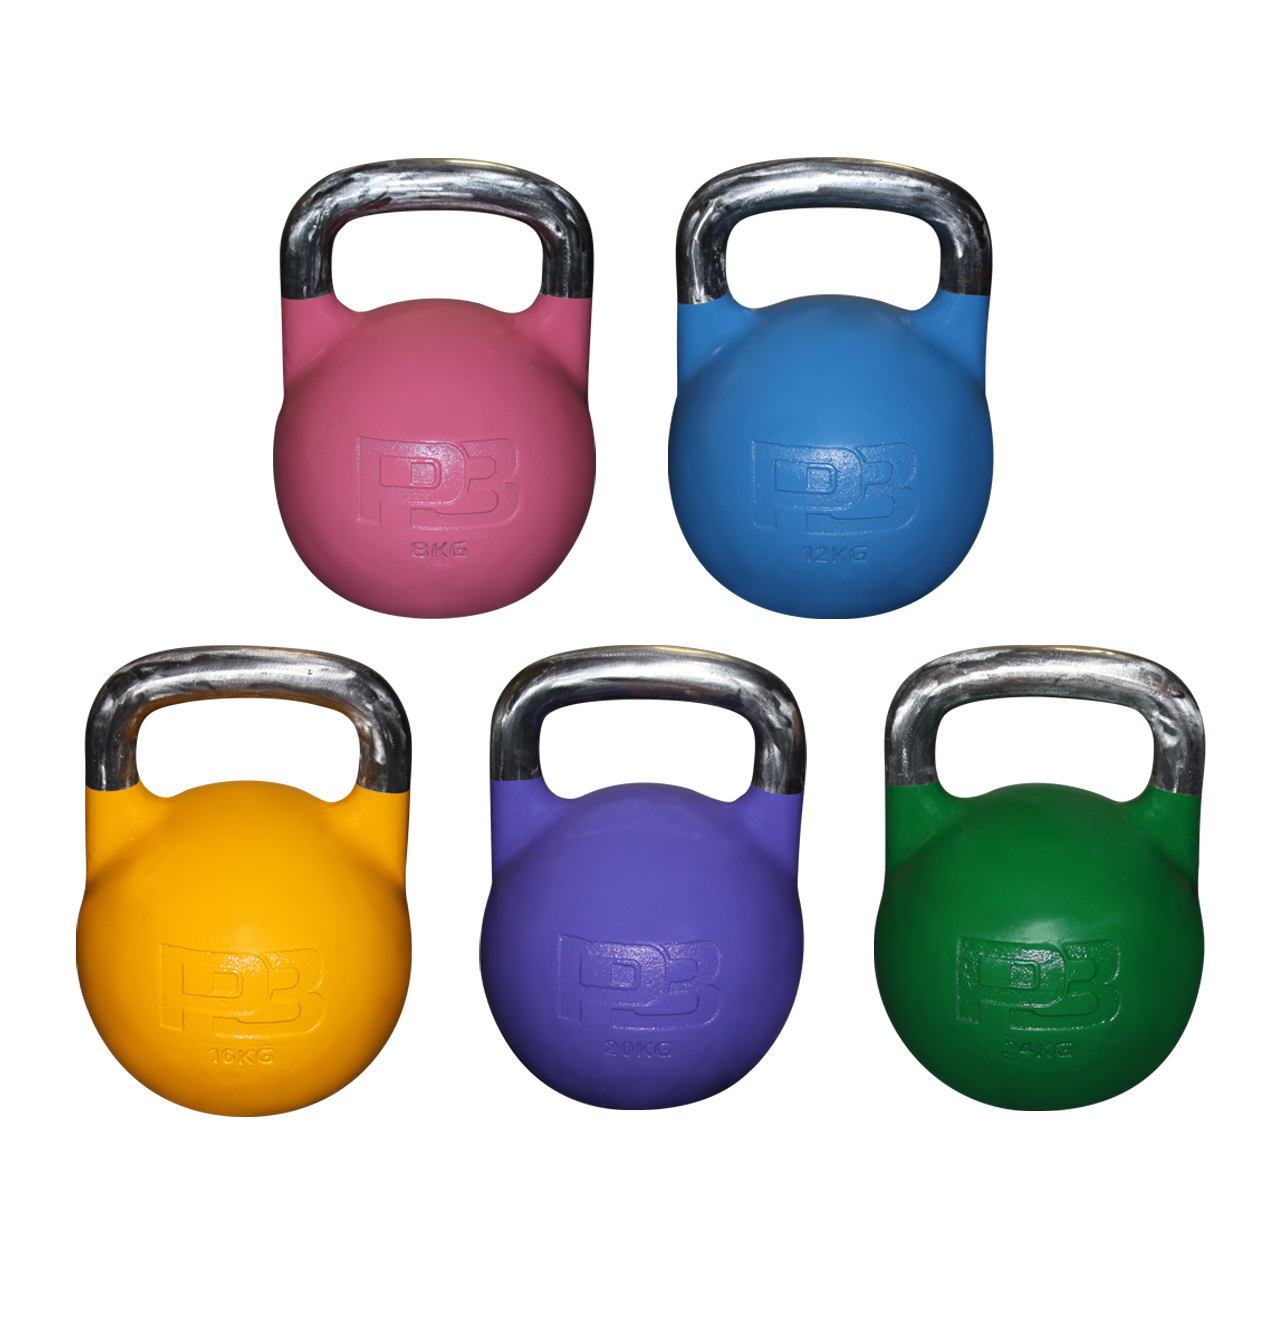 How to get that blood pumping with a great kettlebell workout!